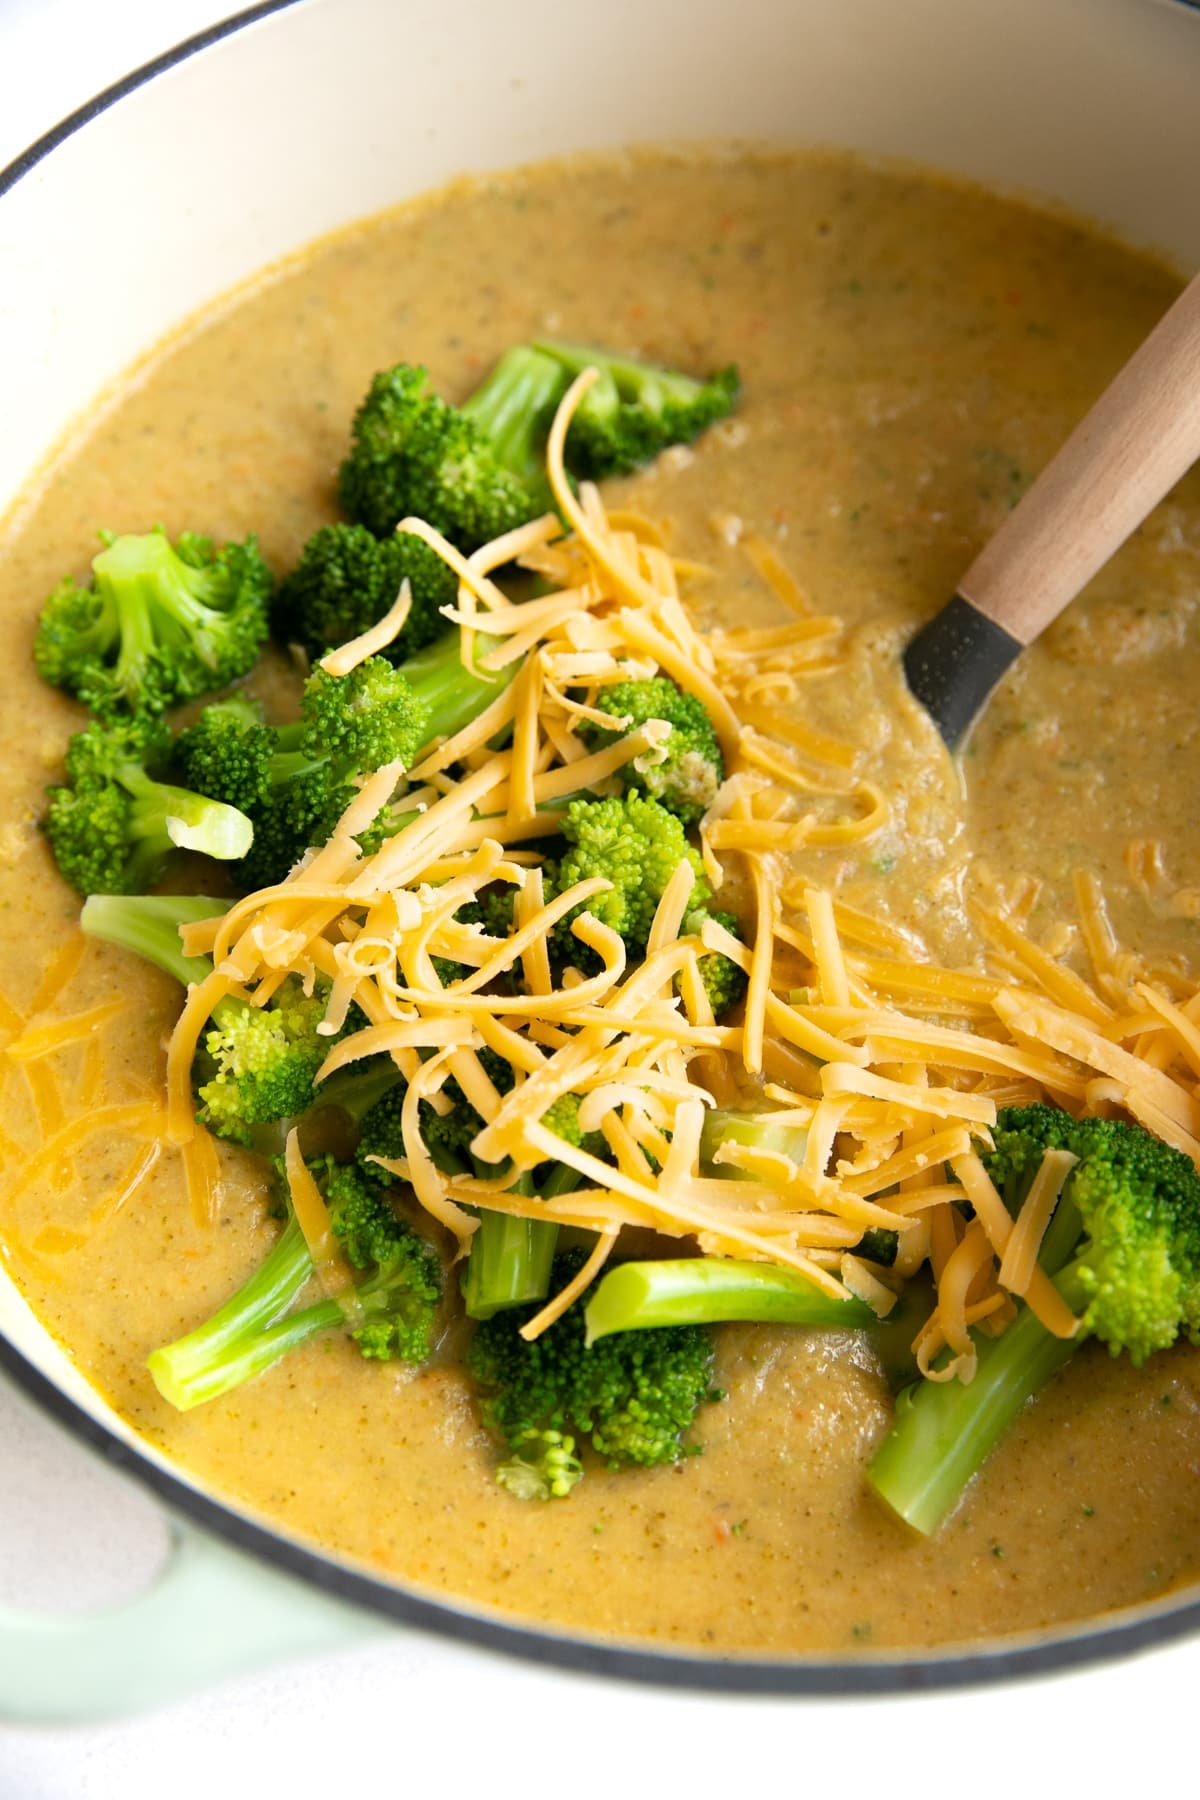 Large pot filled with cooked broccoli cheddar soup and topped with shredded cheddar cheese and blanched broccoli florets.